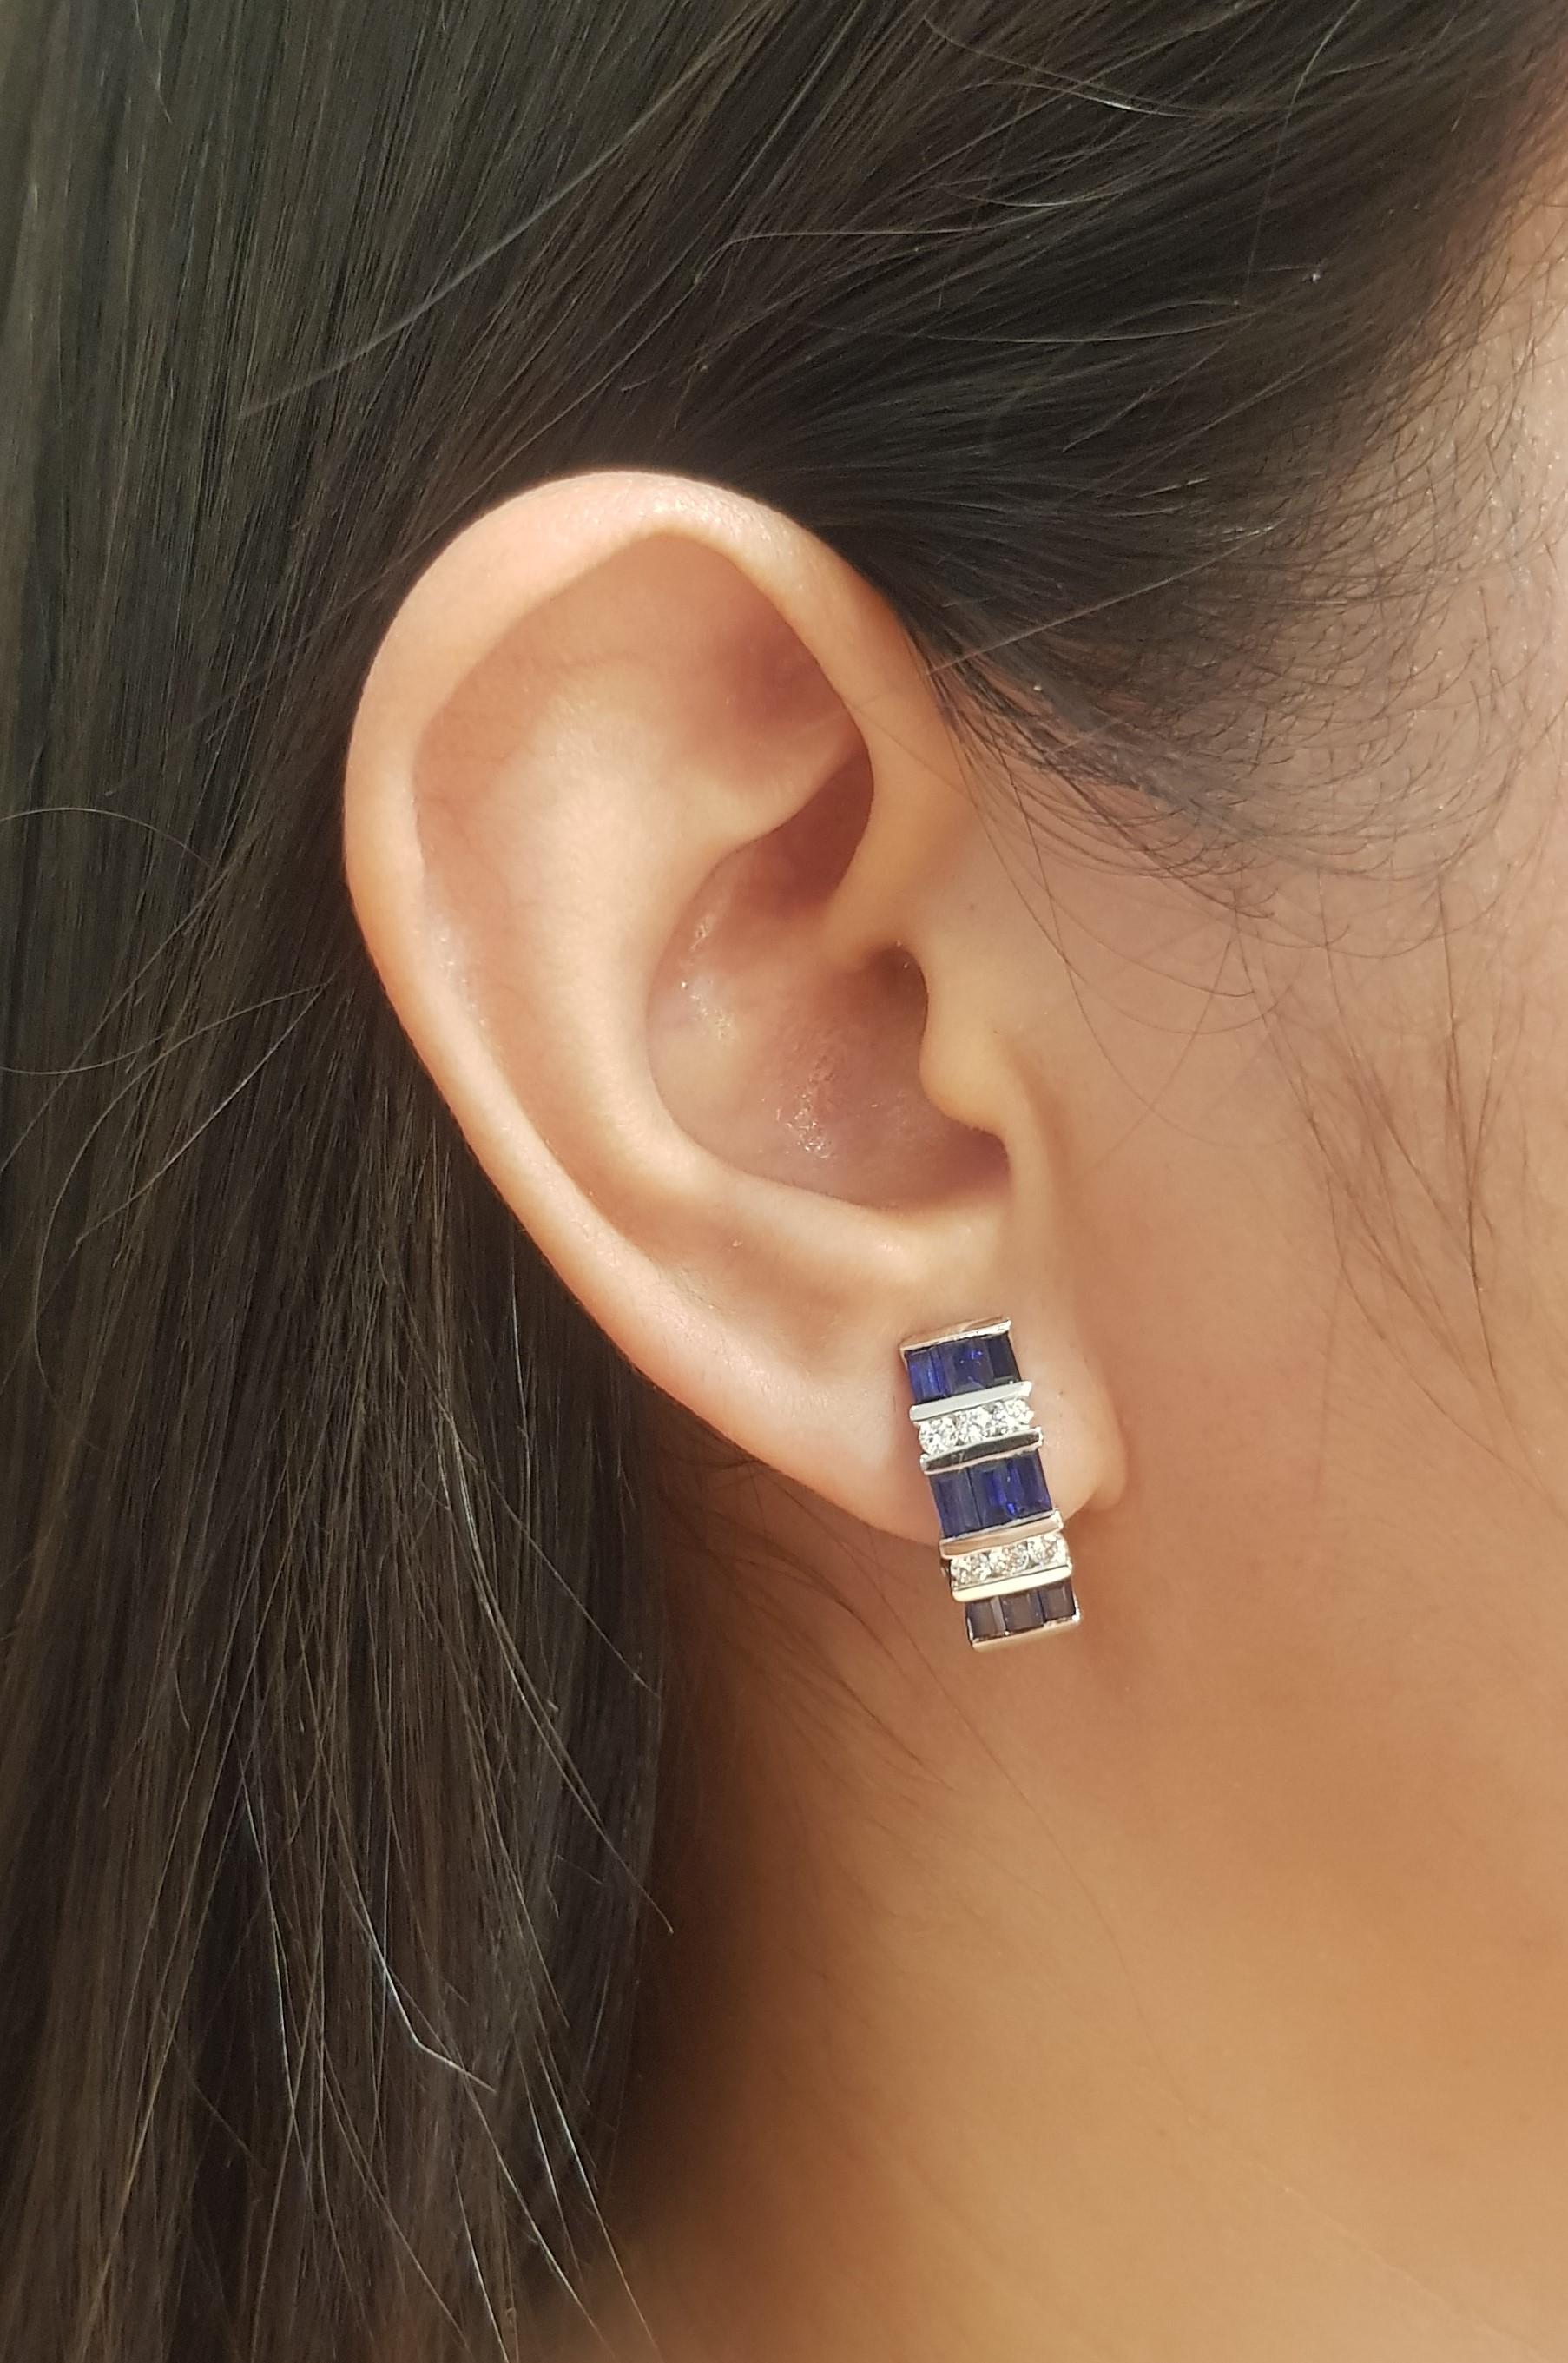 Blue Sapphire 2.60 carats with Diamond 0.44 carat Earrings set in 18K White Gold Settings

Width: 0.6 cm 
Length: 1.8 cm
Total Weight: 8.09 grams

